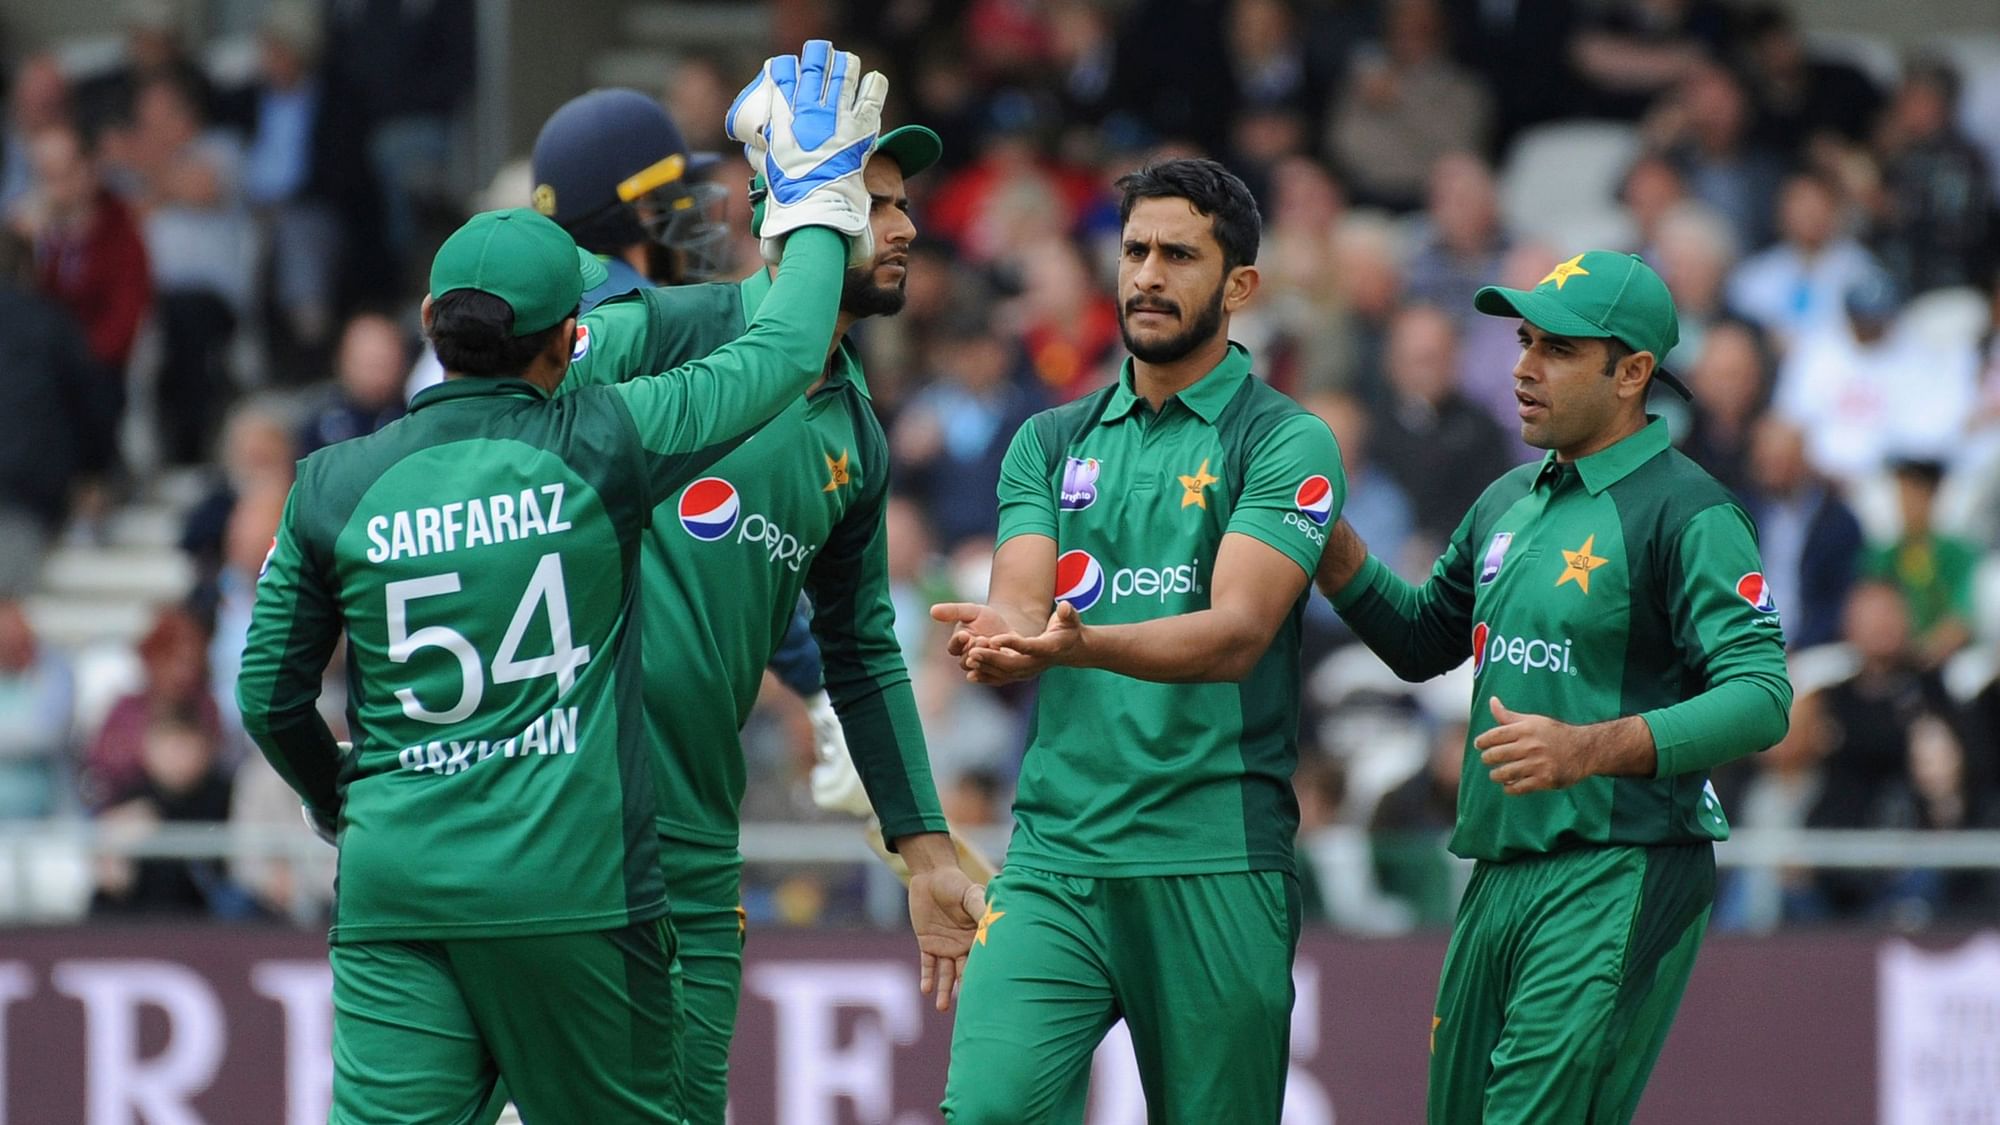 Pakistan lost to Afghanistan on Friday in their first warm-up game.